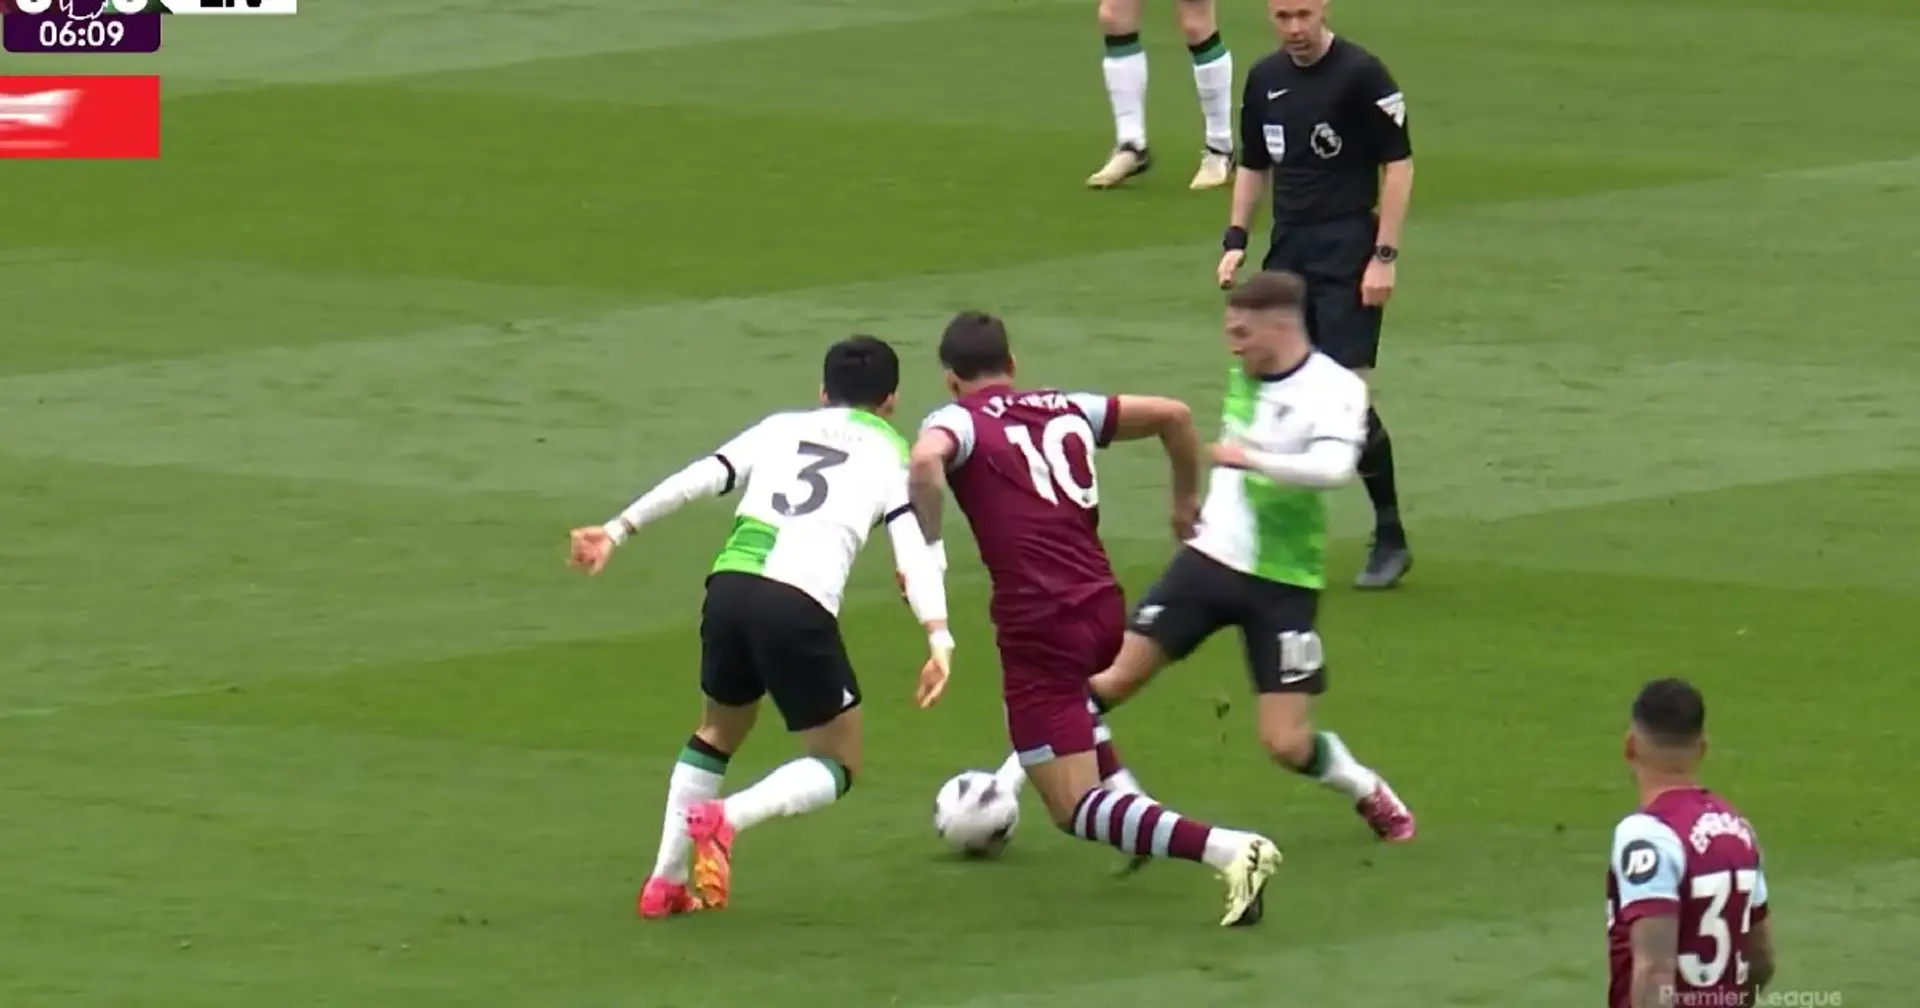 Spotted: Paqueta gets away with no booking after horrid tackle on Mac Allister